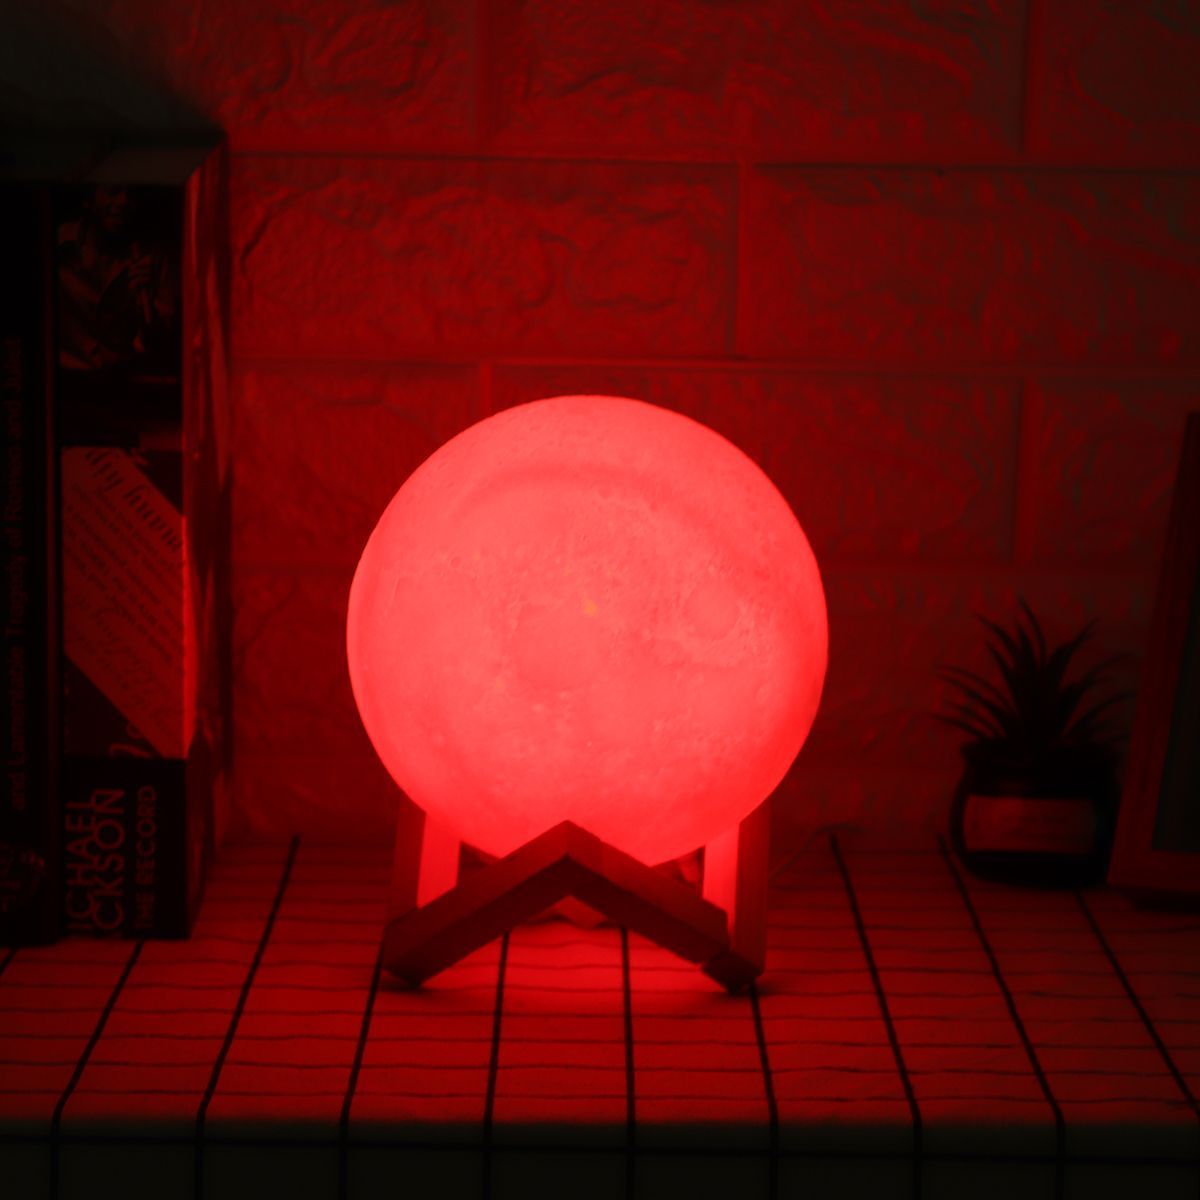 3D-Printing-Moon-Lamp-Moonlight-USB-Changing-LED-Night-Light-Touch-APP-16-Color-1675366